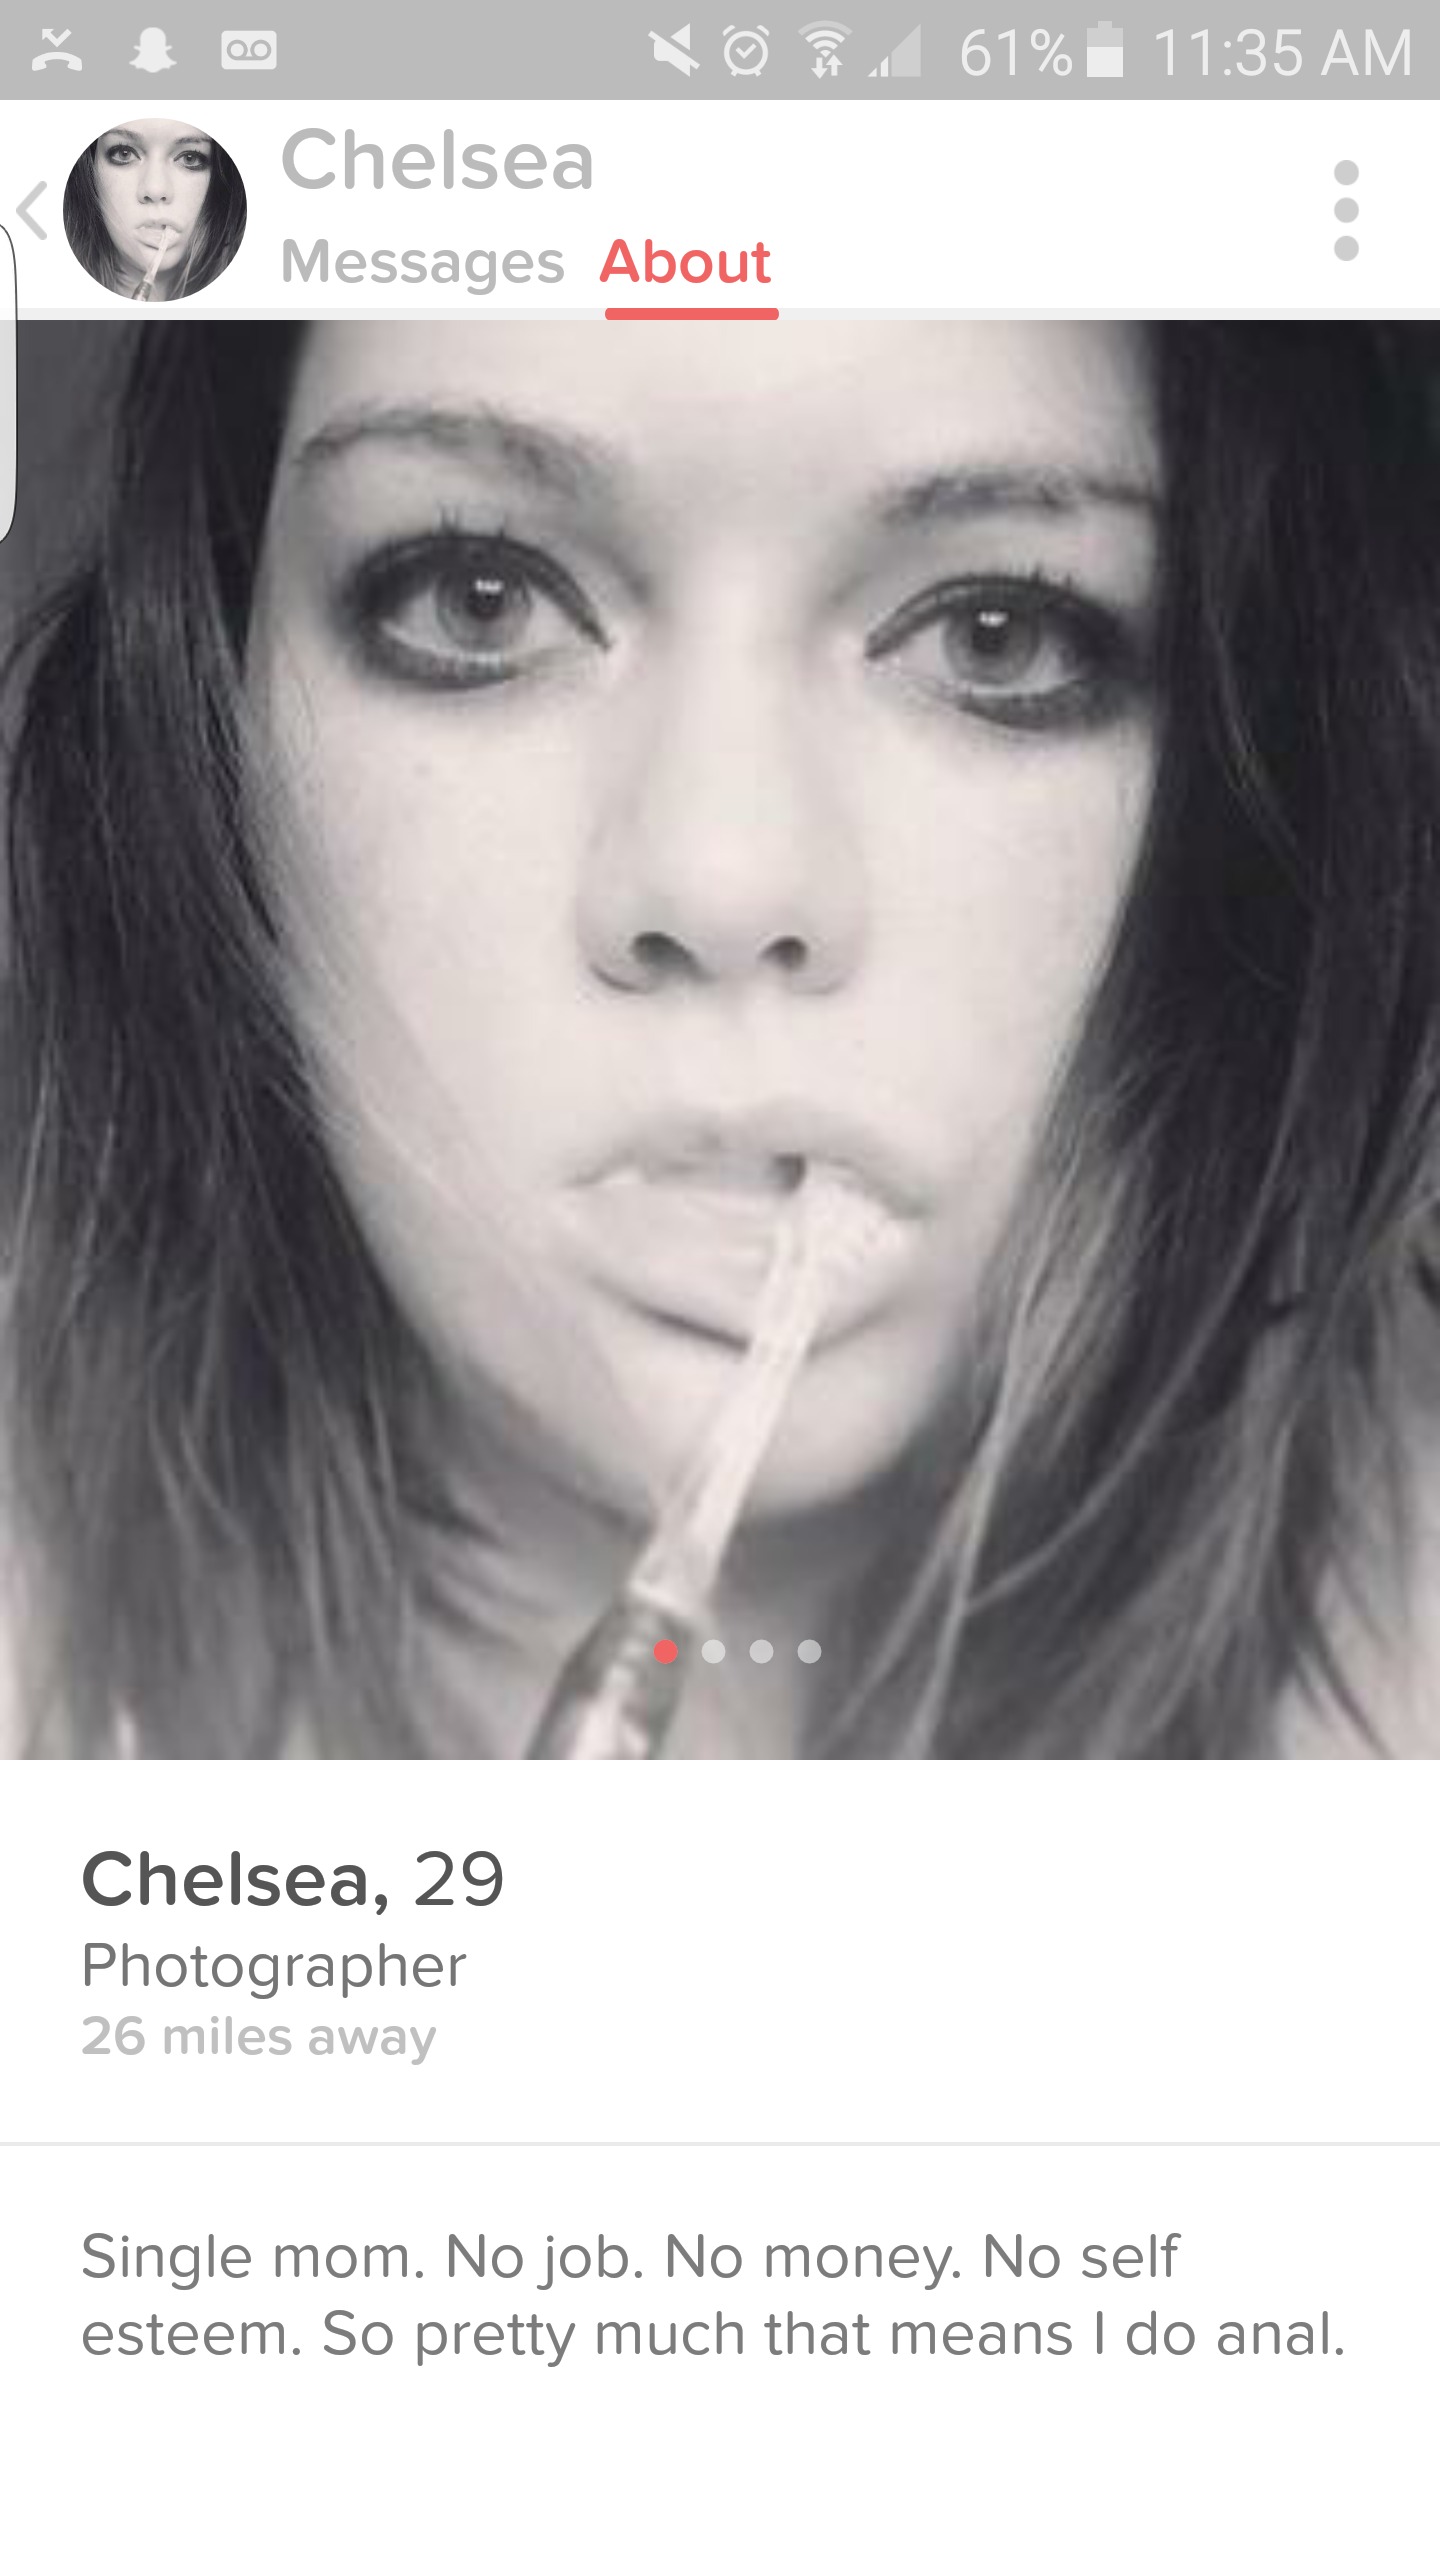 lip - A 61% Chelsea Messages About Chelsea, 29 Photographer 26 miles away Single mom. No job. No money. No self esteem. So pretty much that means I do anal.